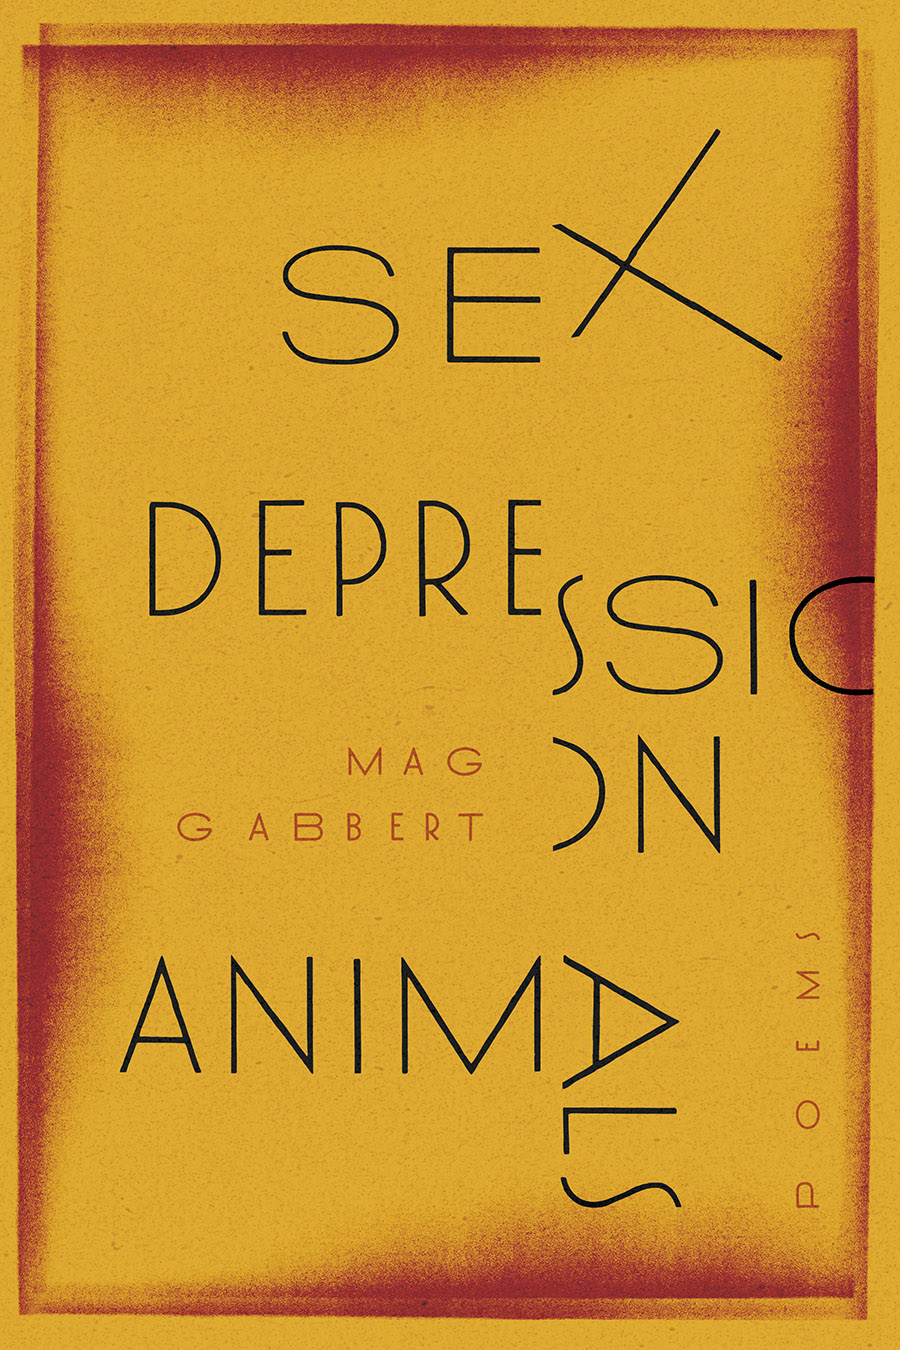 Front cover of Sex Depression Animals: Poems, by Mag Gabbert, with the text in black shapes on a yellow background with red edges.